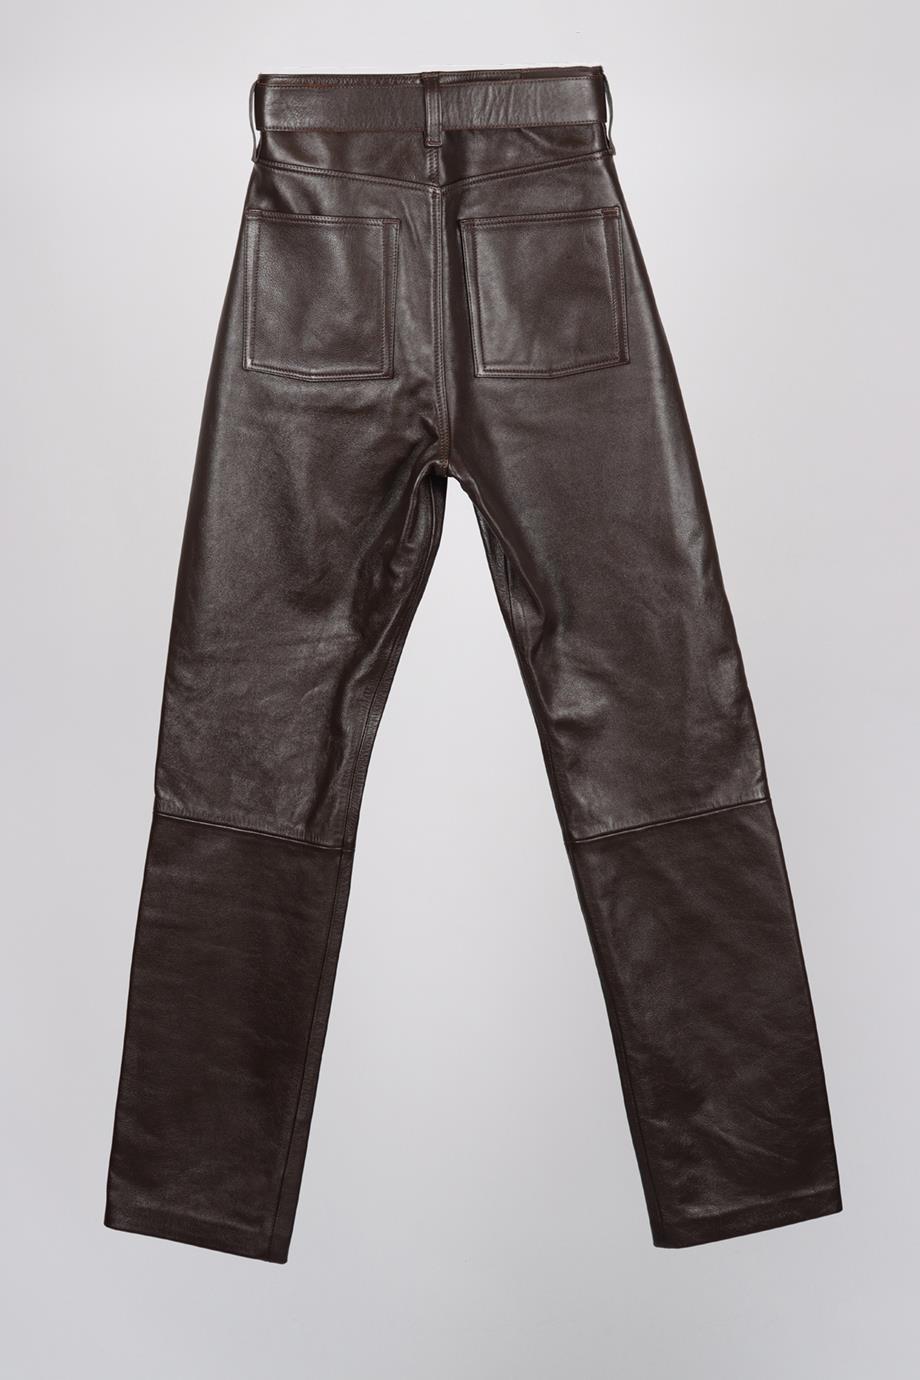 ANINE BING BELTED LEATHER STRAIGHT LEG PANTS FR 32 UK 4